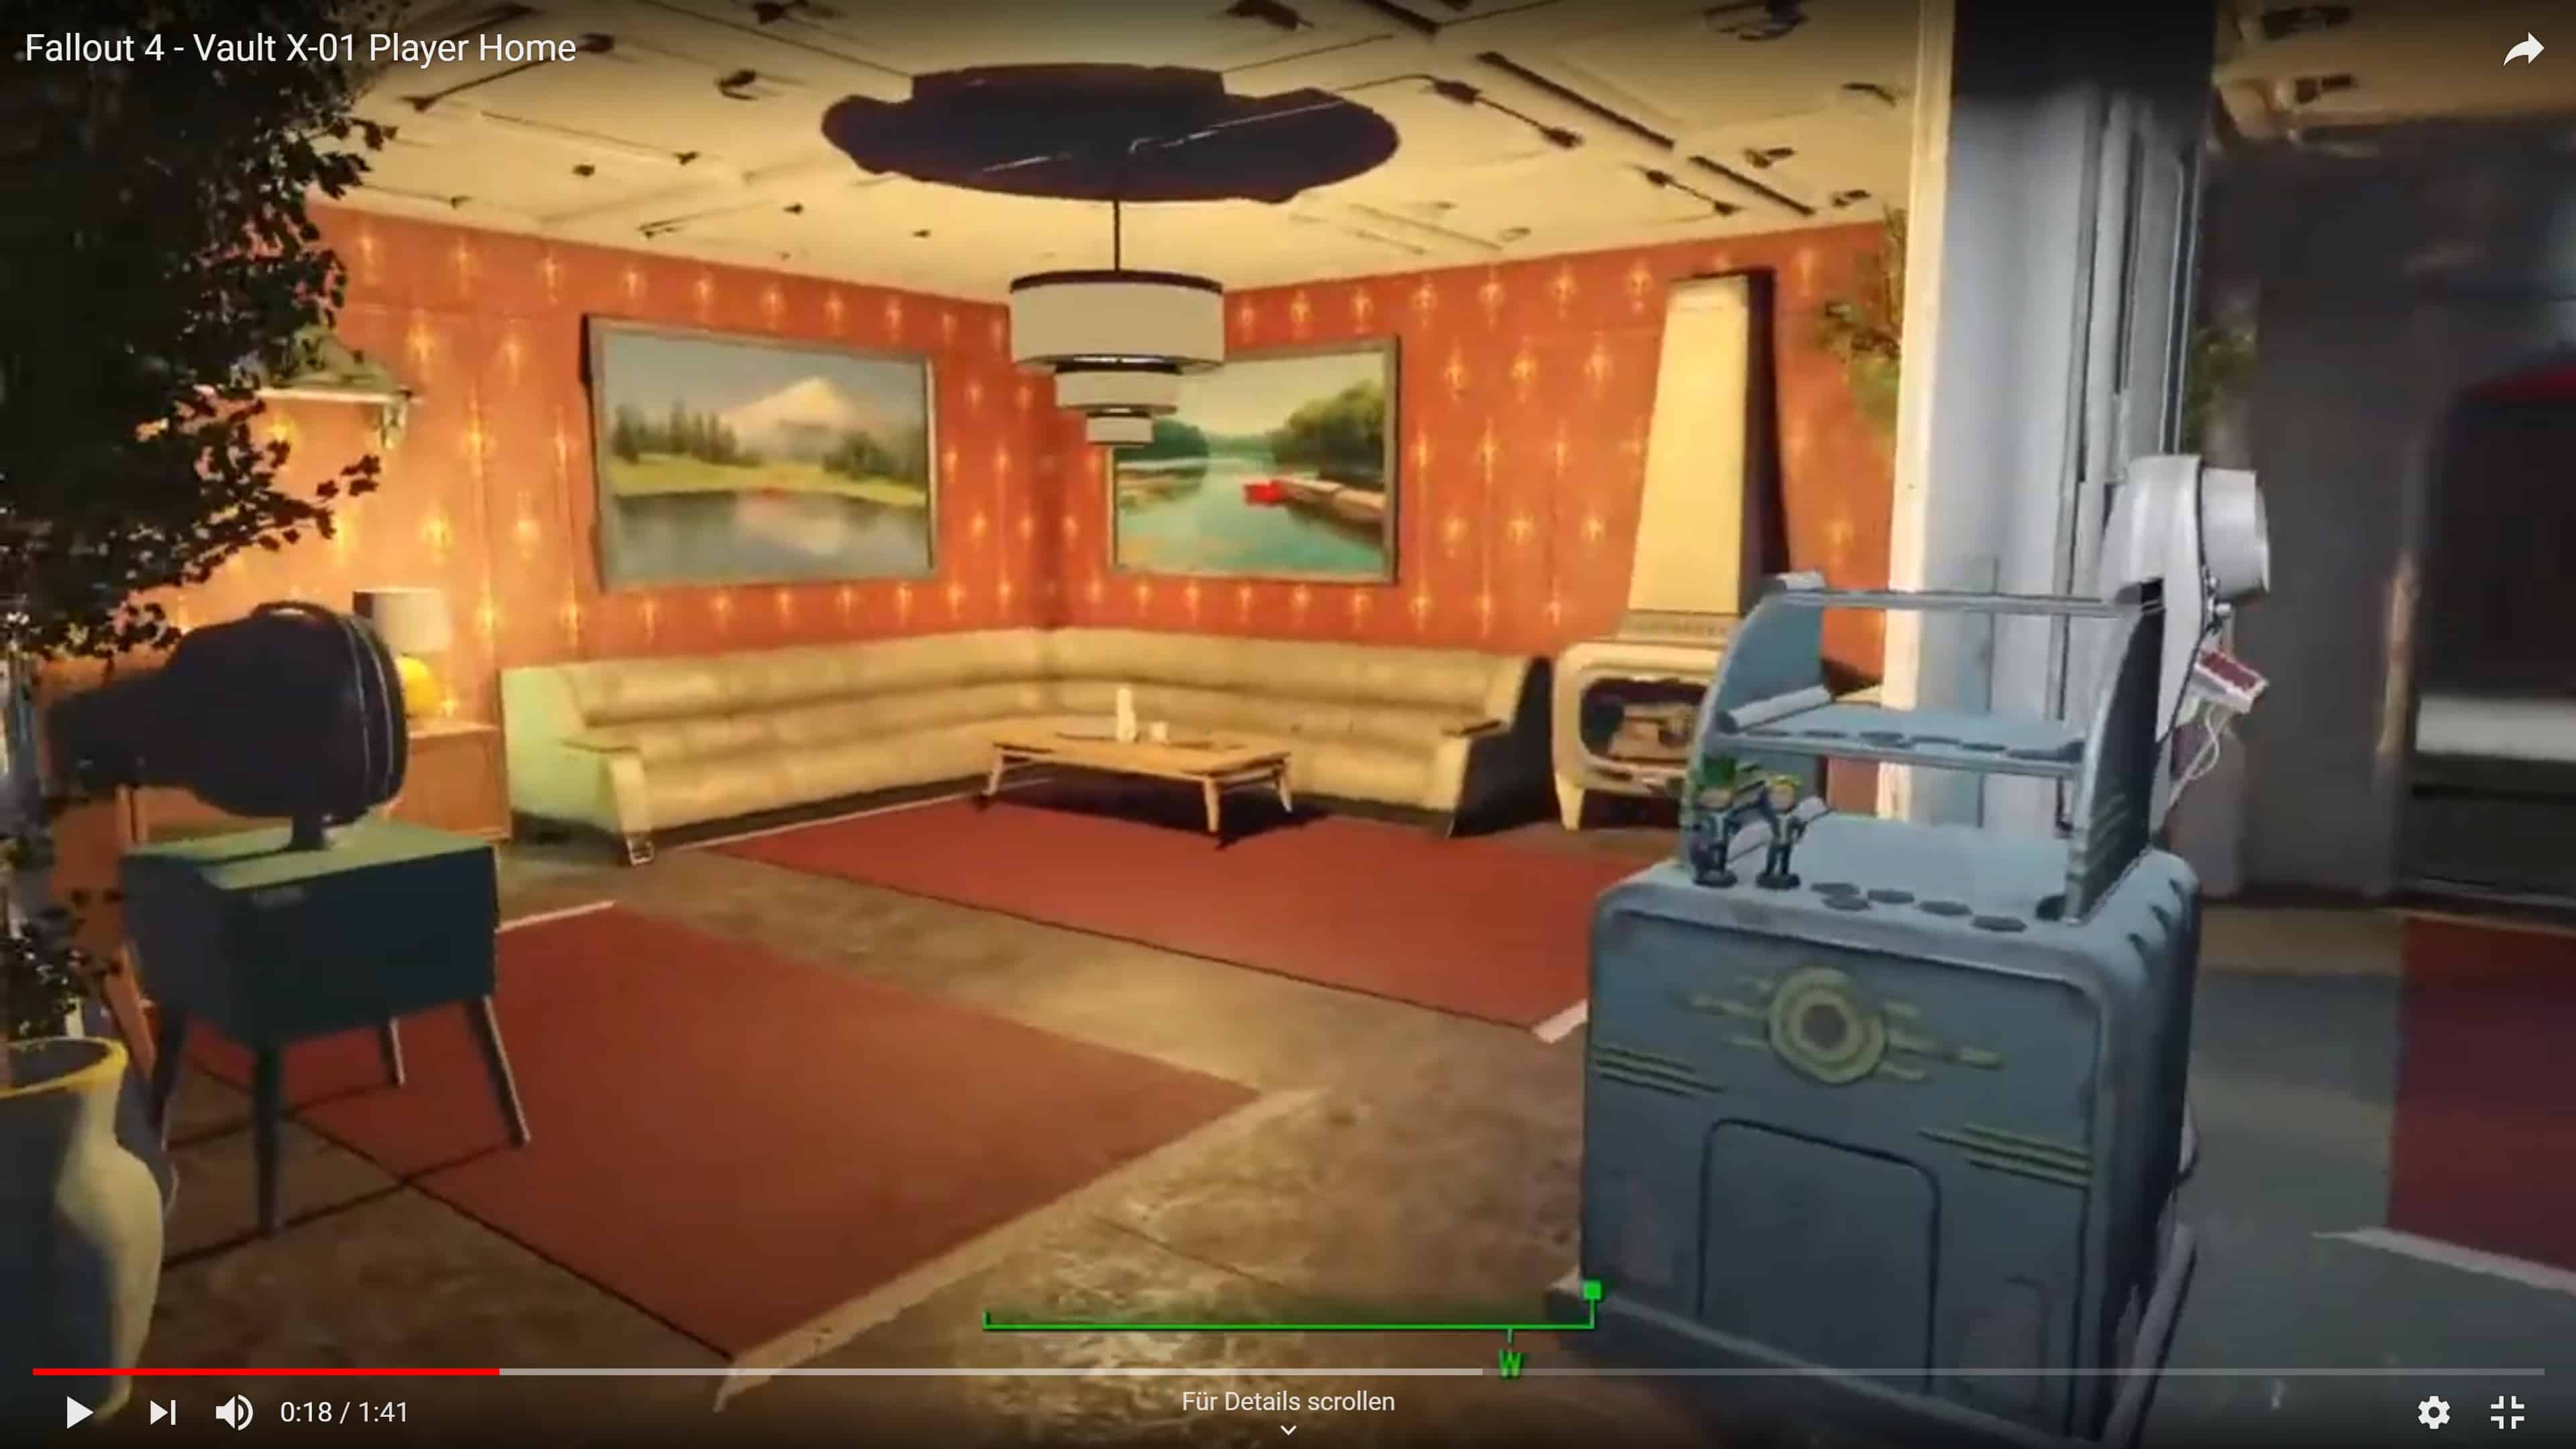 Vault X-01 - Player Home - Fallout 4 Mod Download